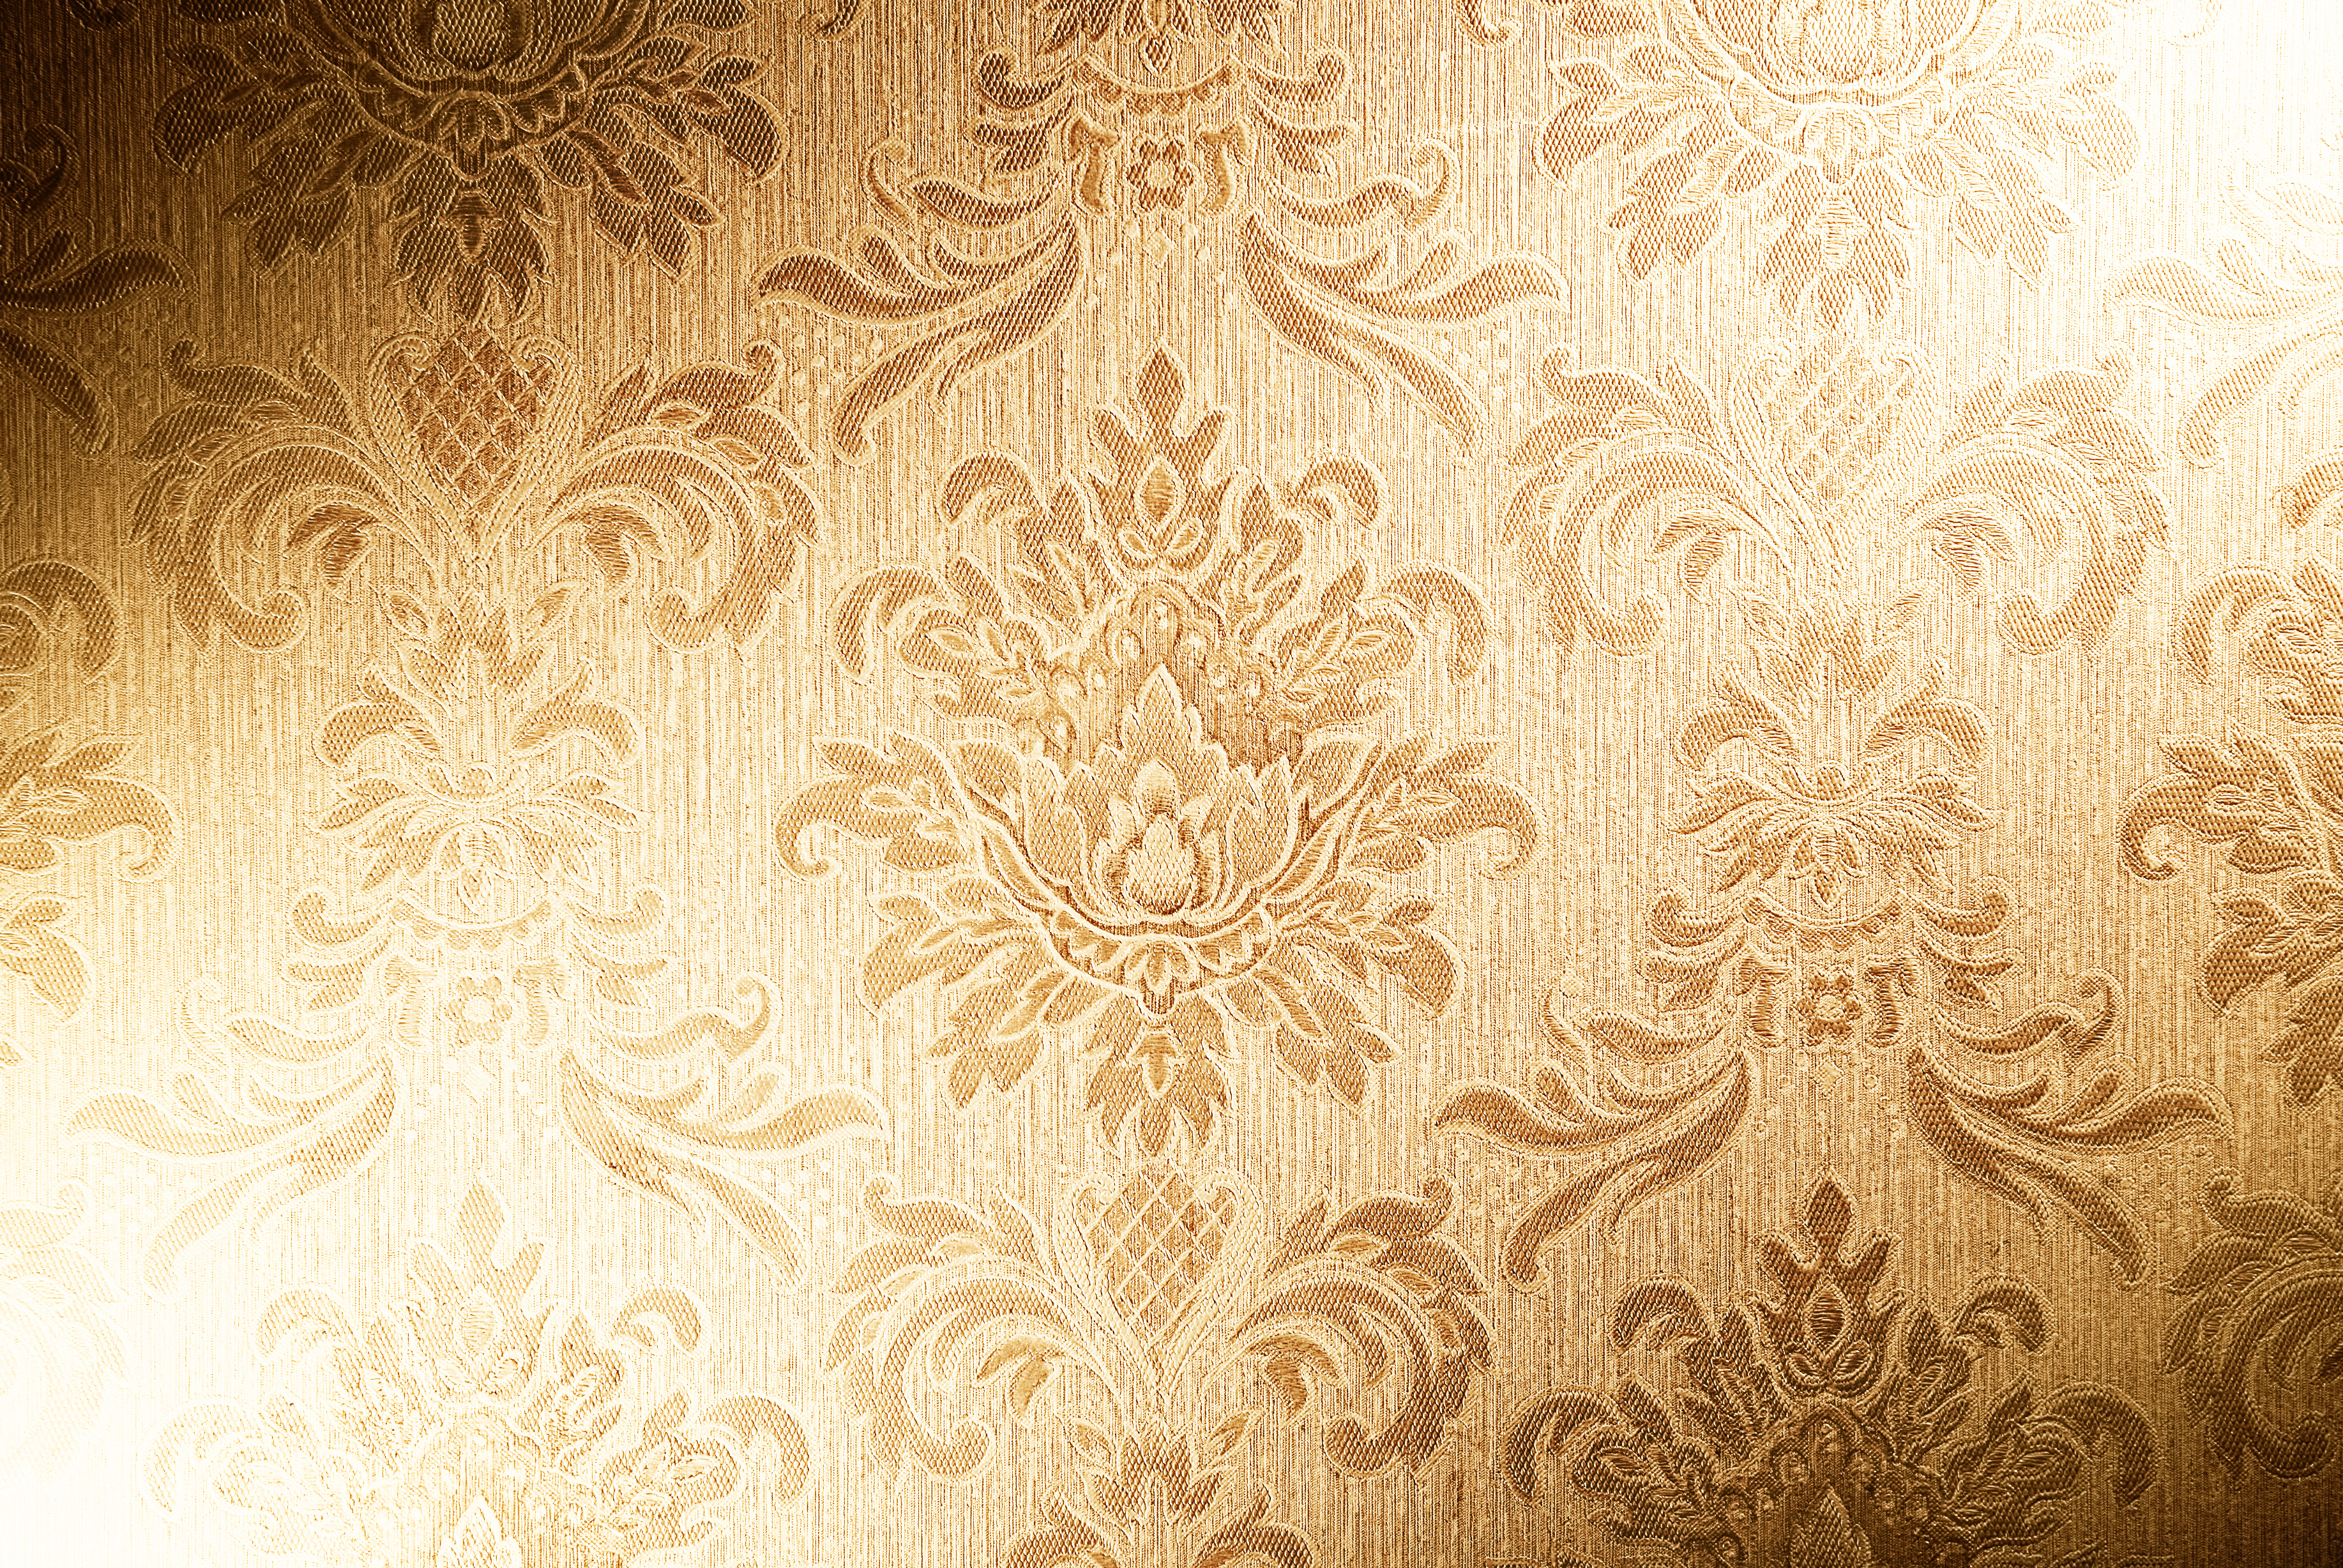 Fabric Texture Gold Vintage